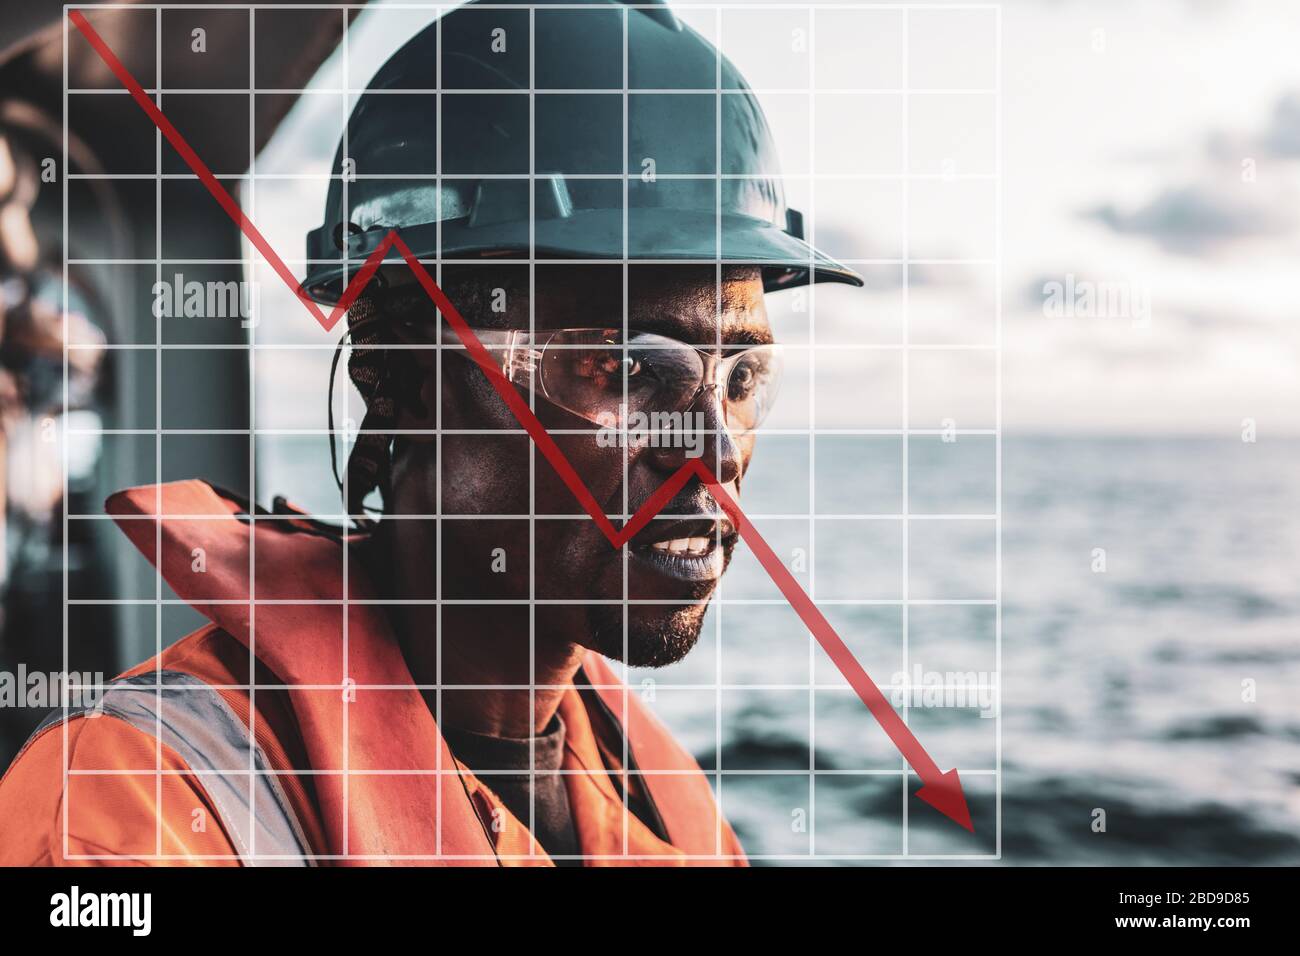 Concept of falling market in marine industry with downward graphics. Seaman AB or Bosun on deck of vessel or ship  Stock Photo